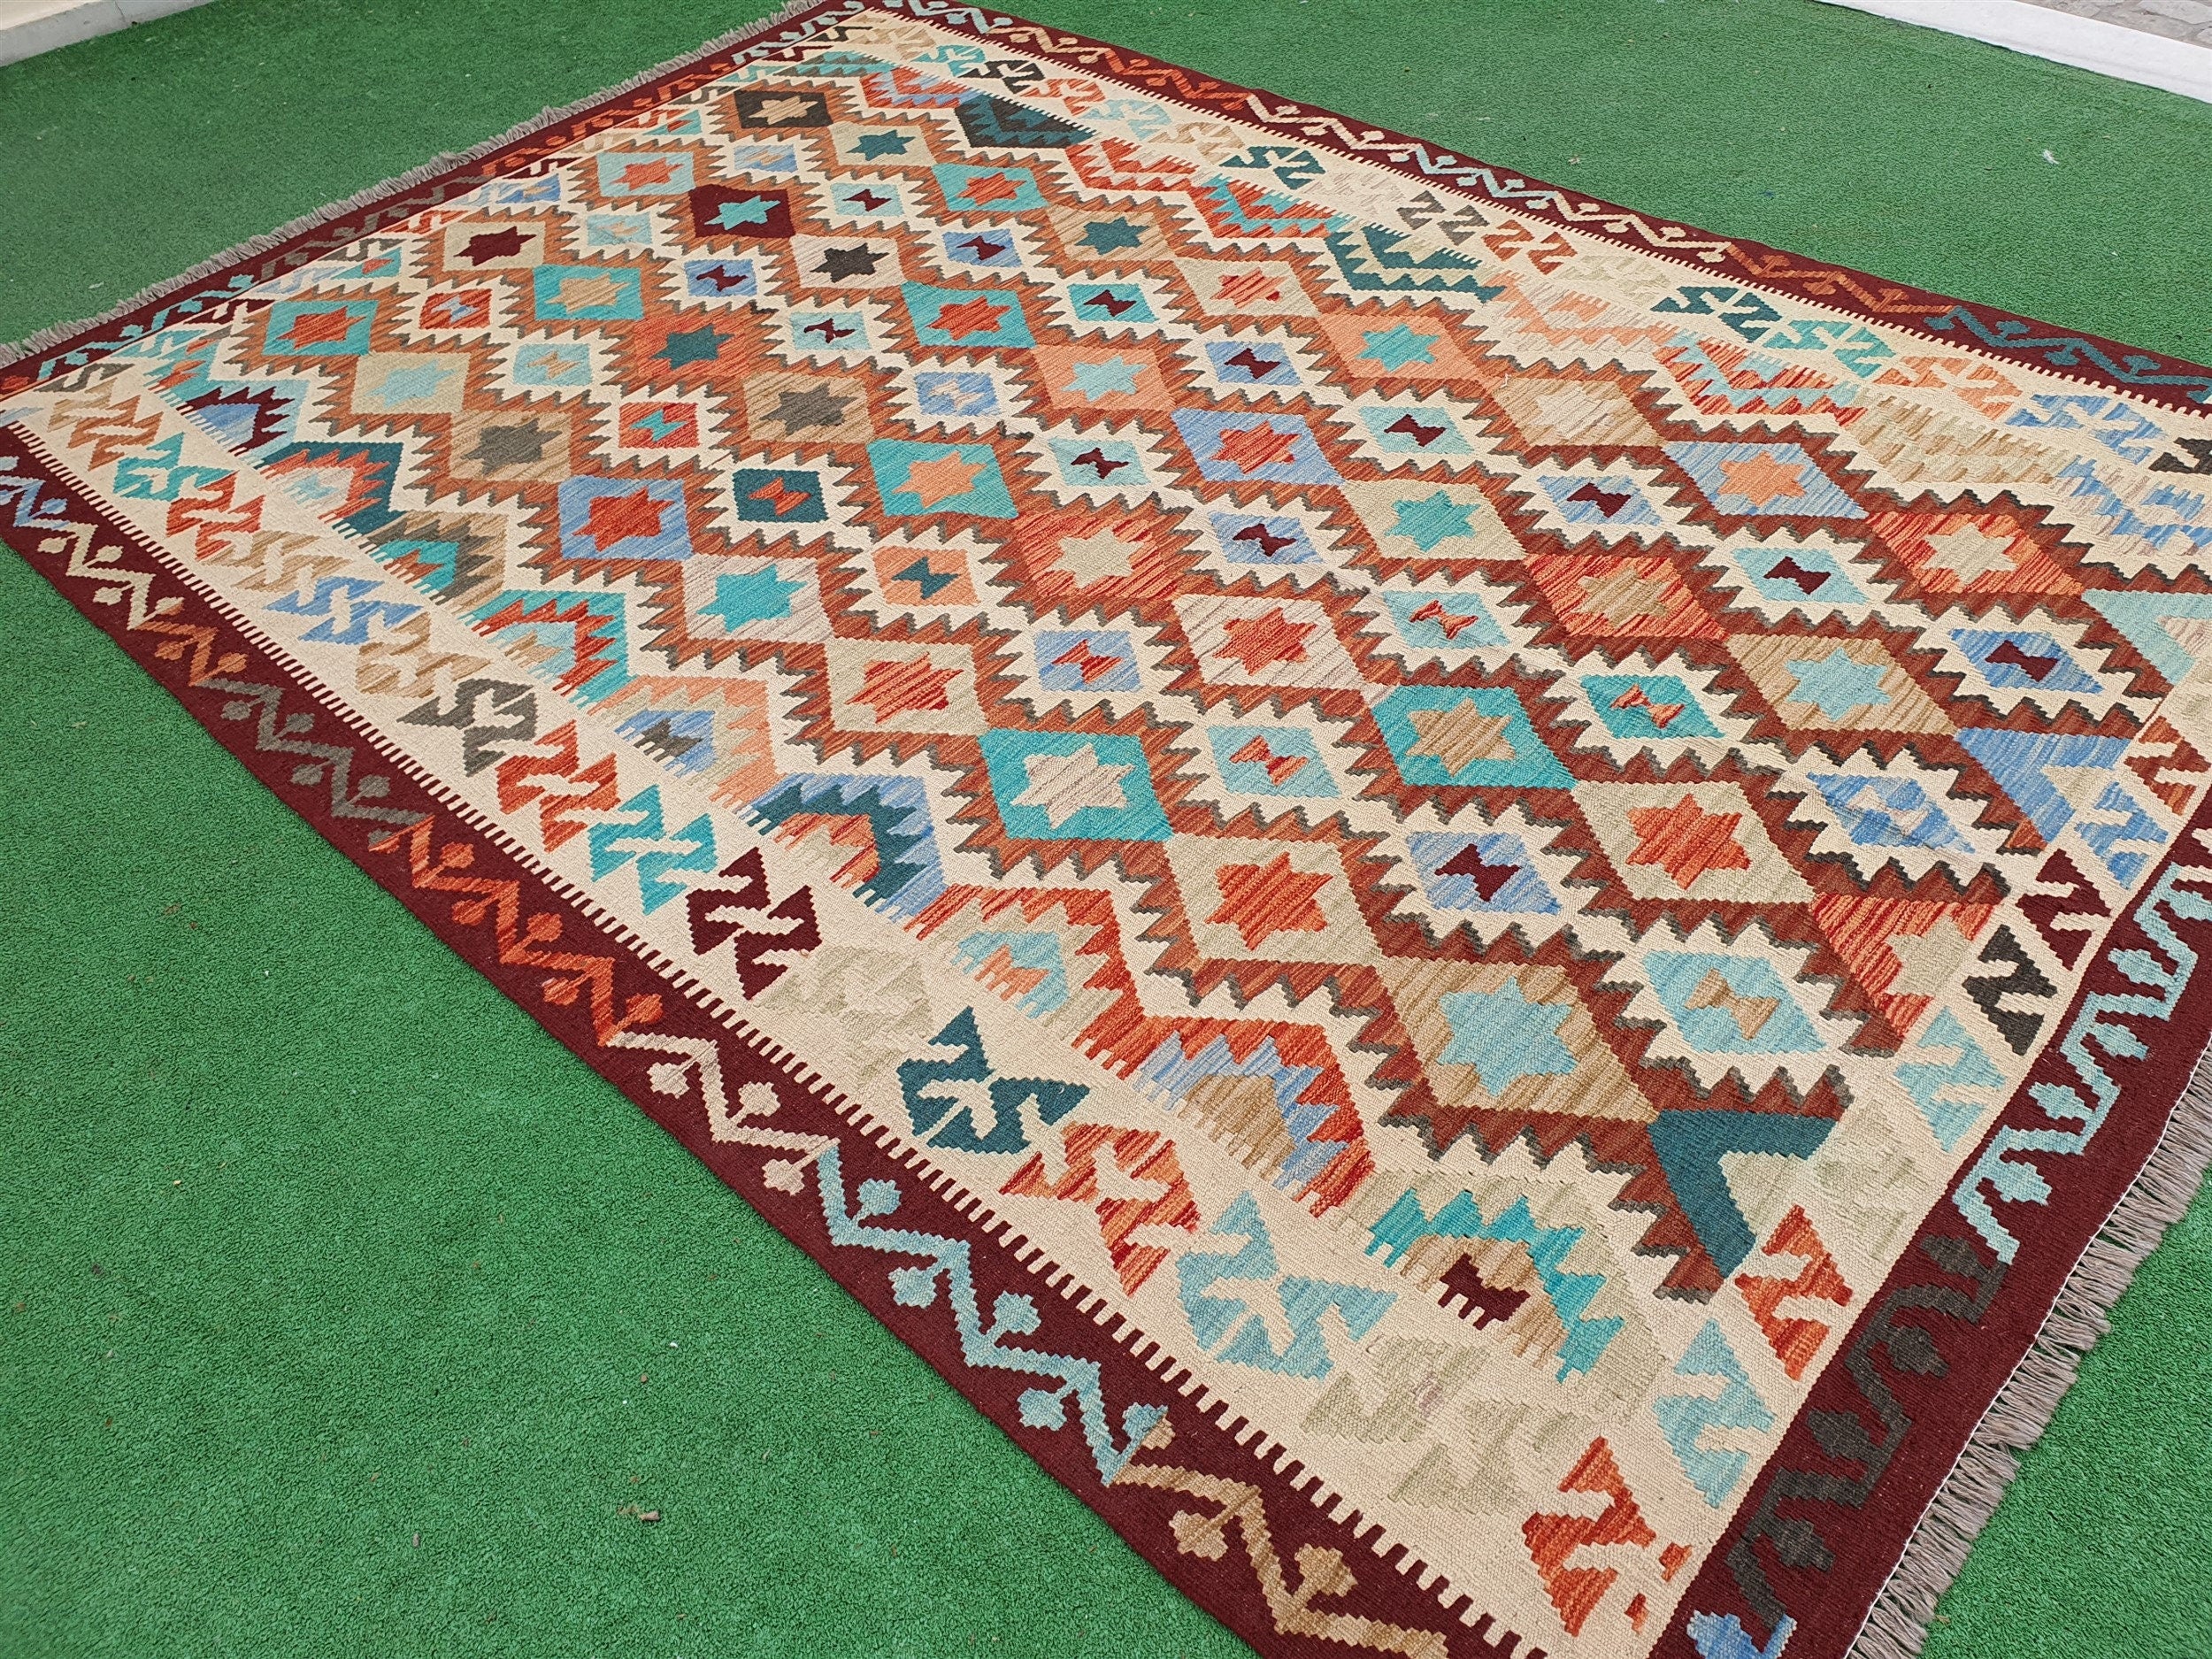 Afghan Kilim Rug, 9 x 6 ft Rust Red, Blue and Off White Turkish Contemporary Kilim